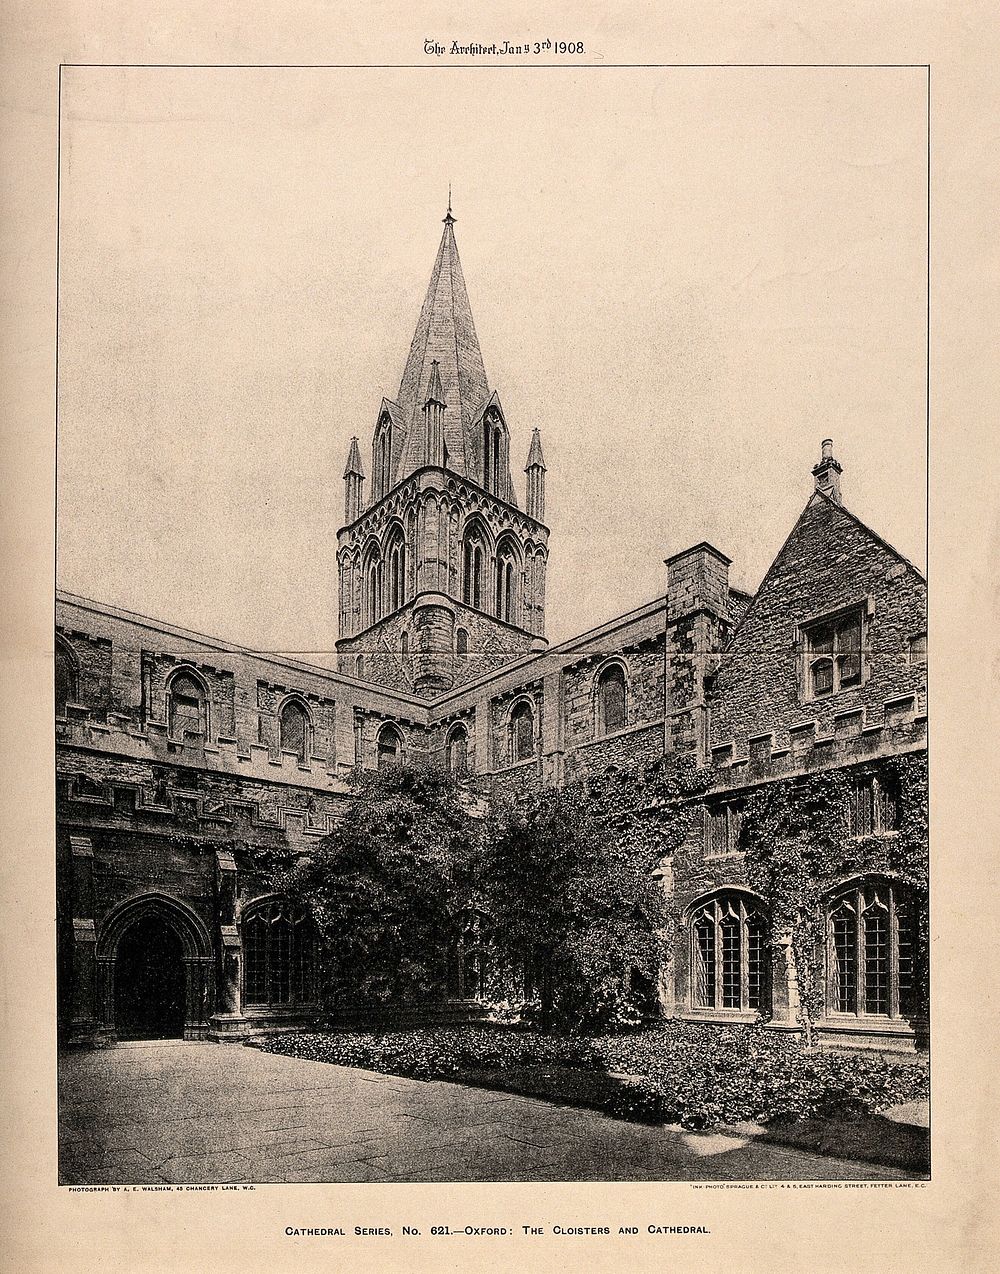 Christ Church, Oxford: cloisters and cathedral. Photolithograph by A.E. Walsham, 1908.